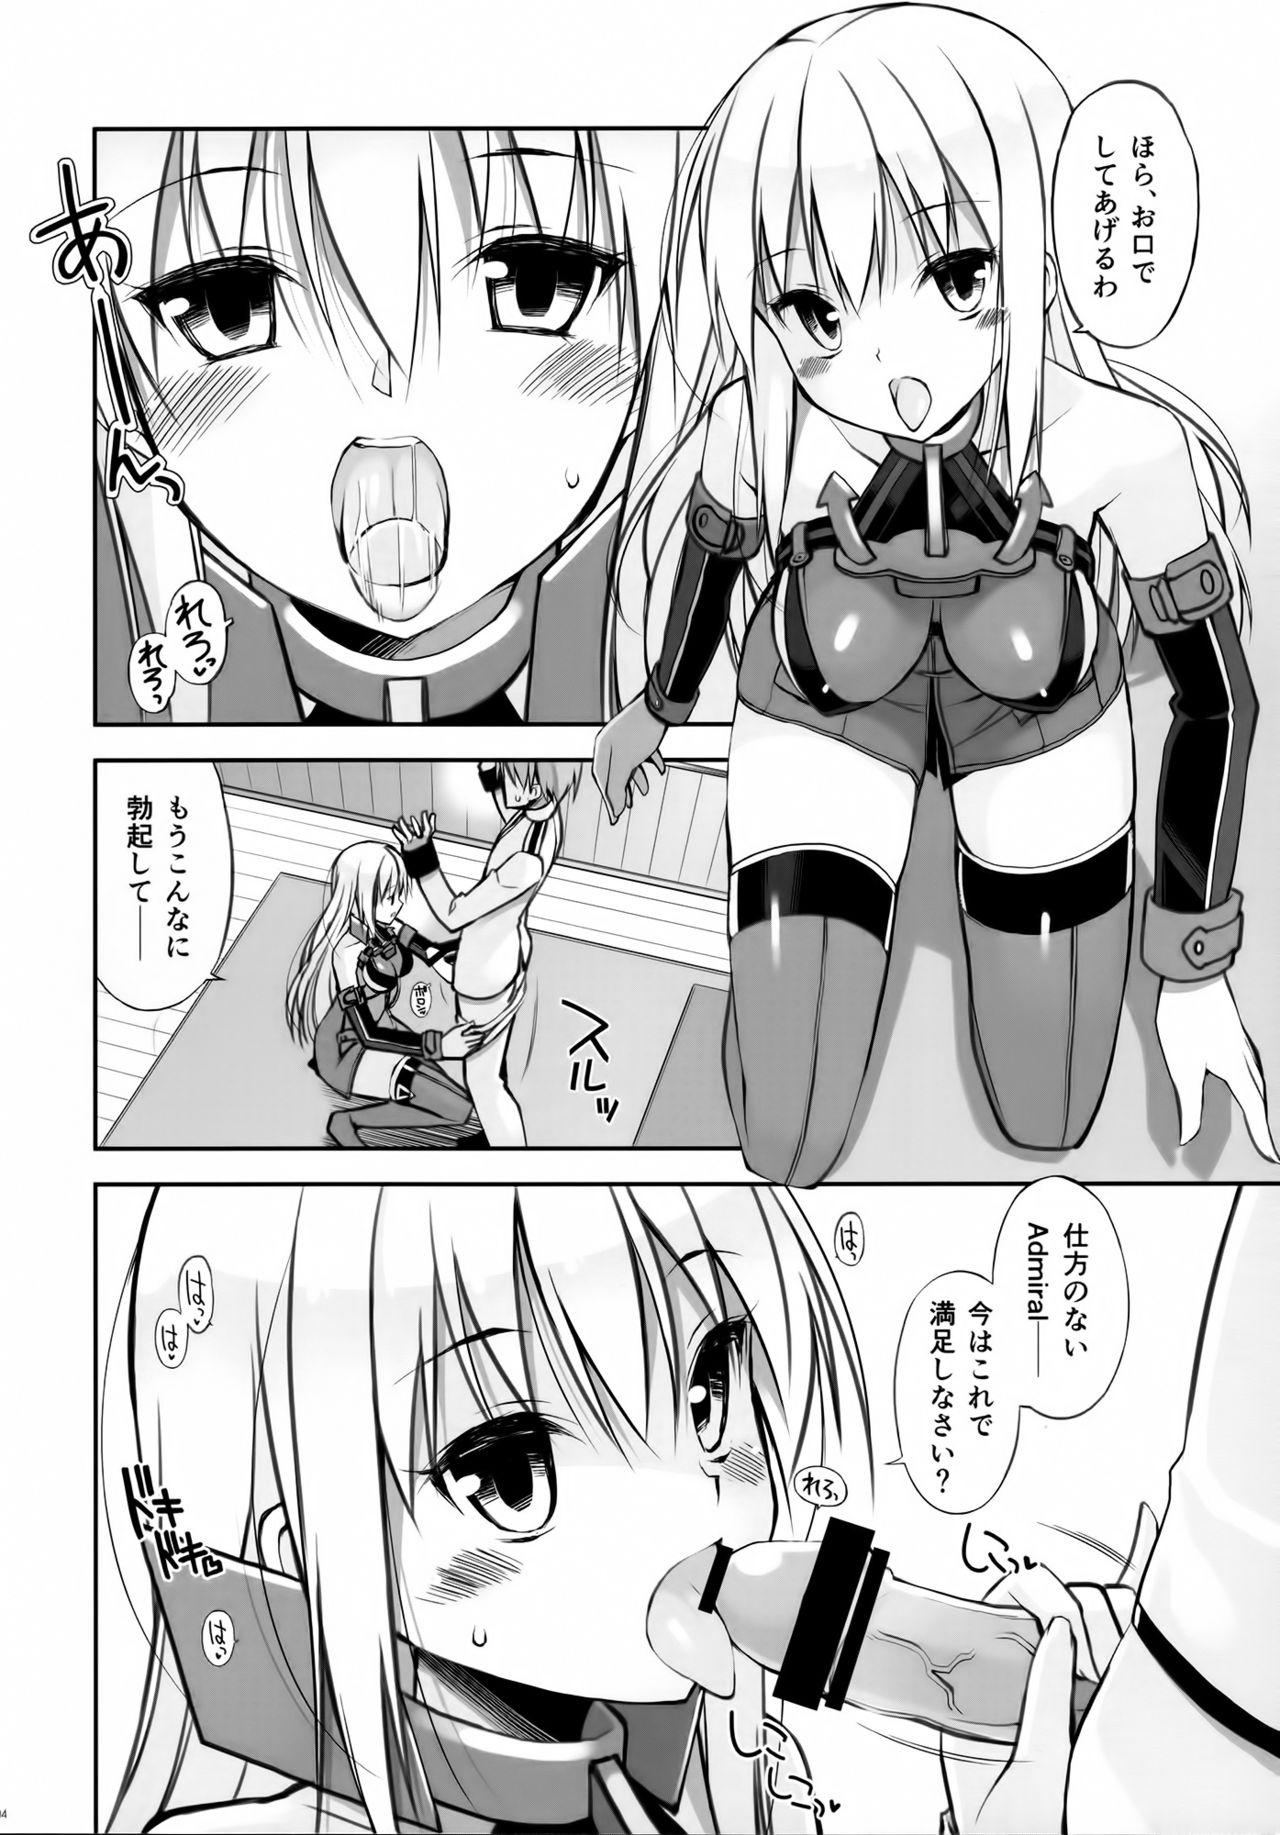 1080p Dearest - Kantai collection Chat - Page 4